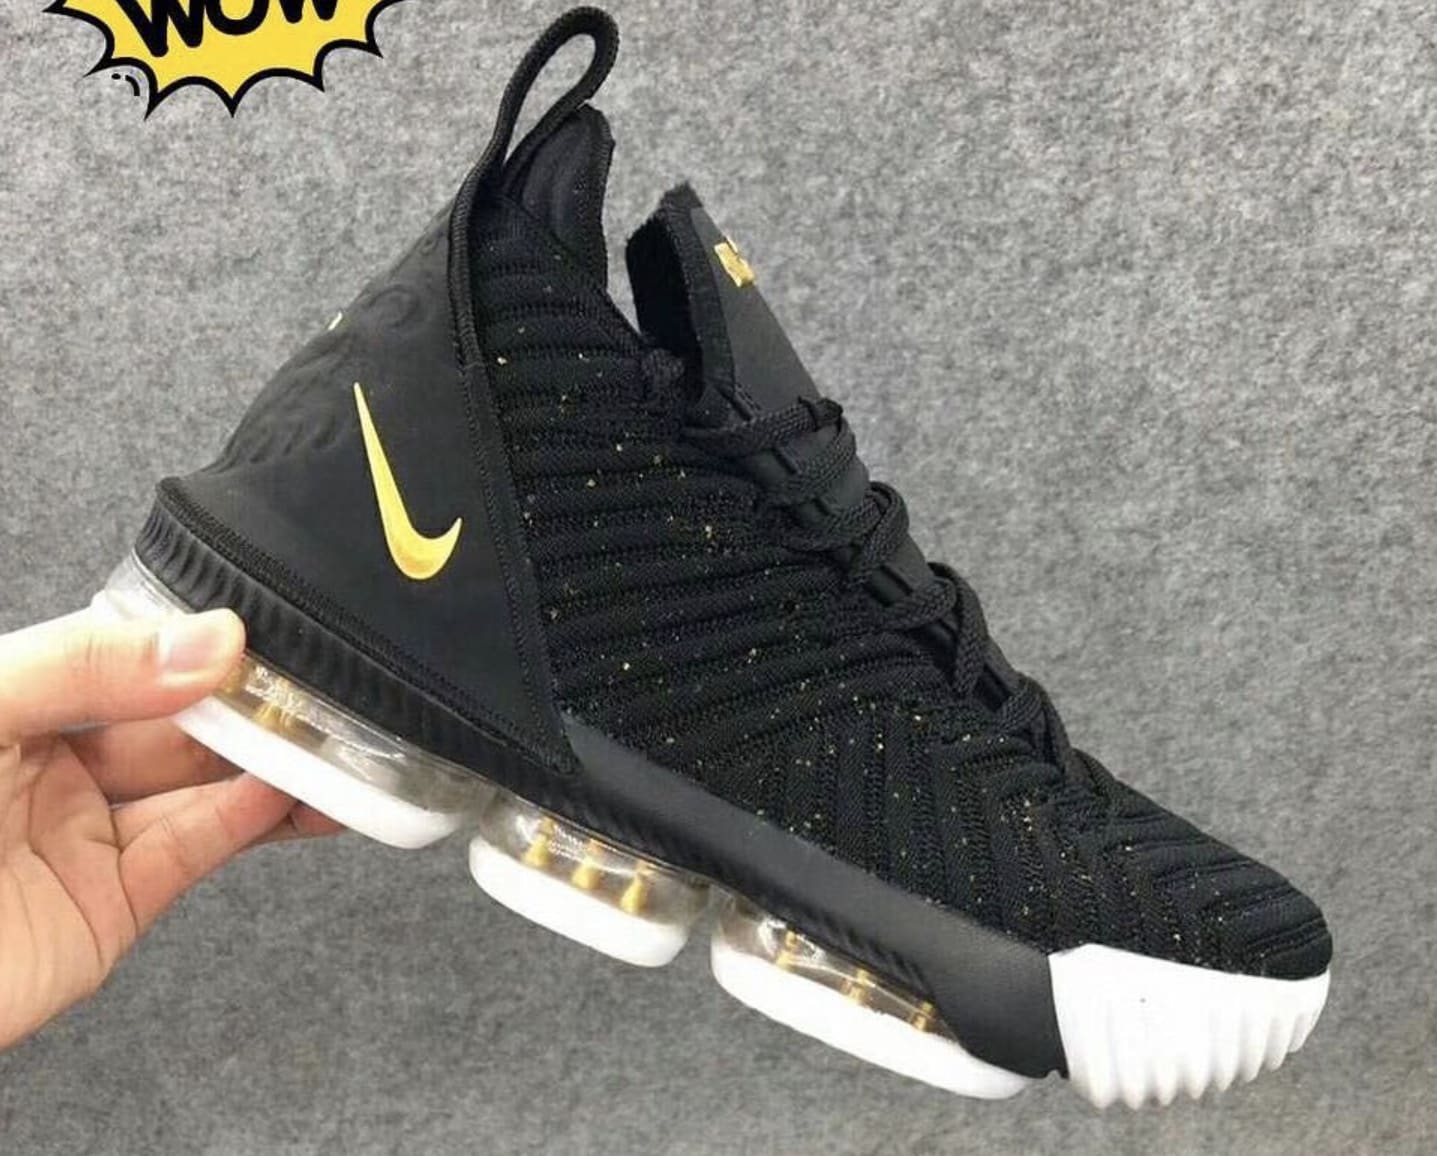 lebron 16 upcoming releases